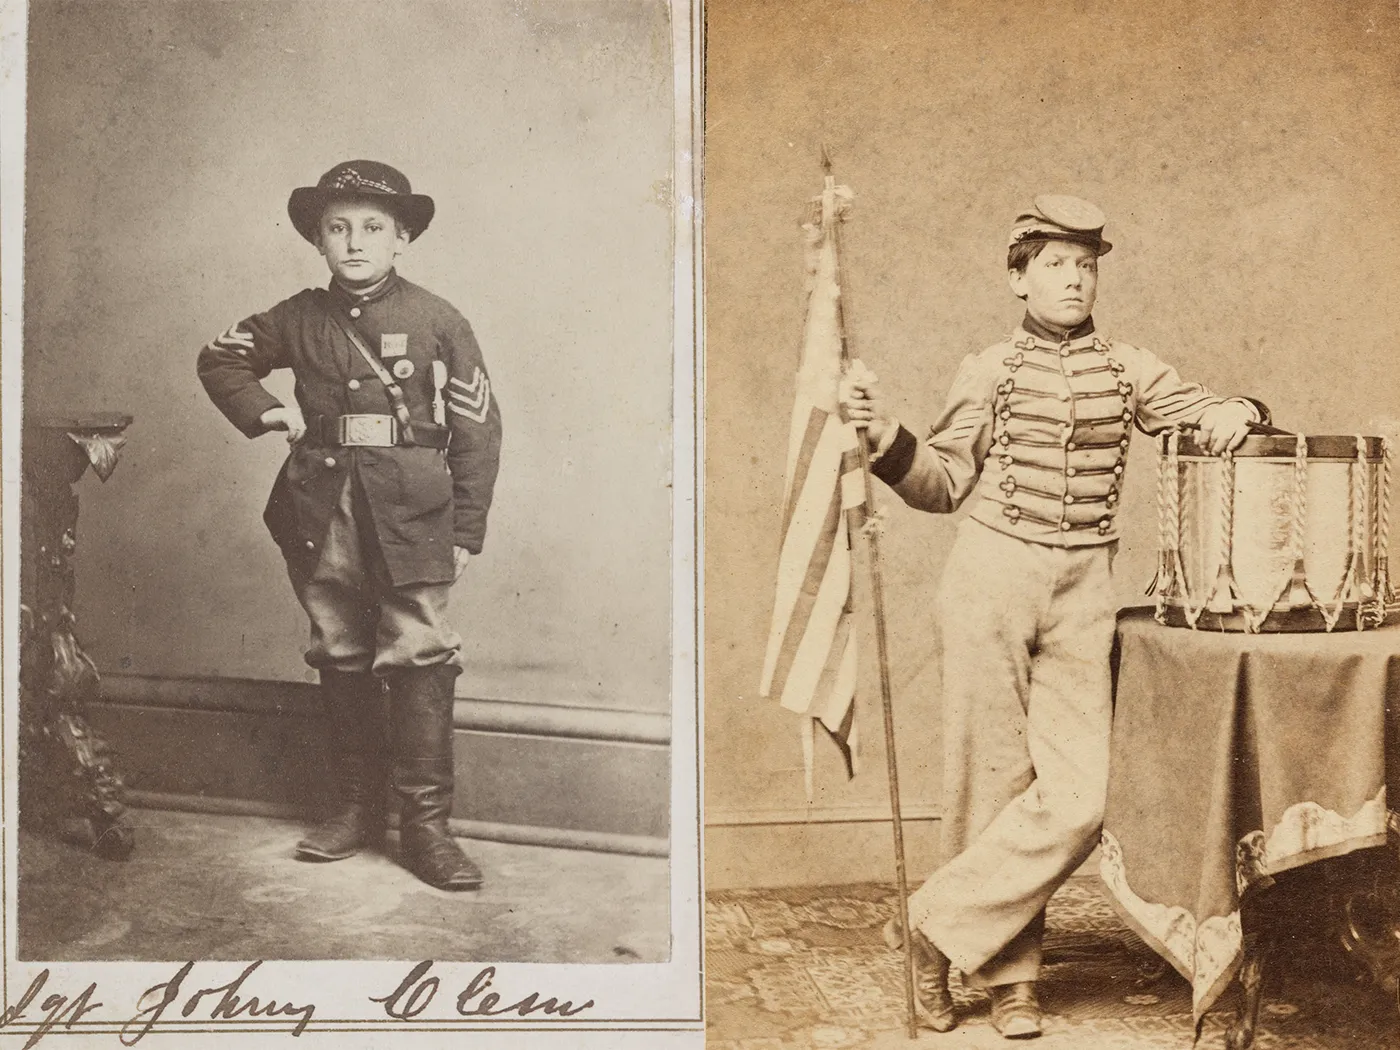 Drummer boy Johnny Clem (left) and Robert Henry Hendershot, who claimed to be the celebrated "drummer boy of Rappahannock" (right)